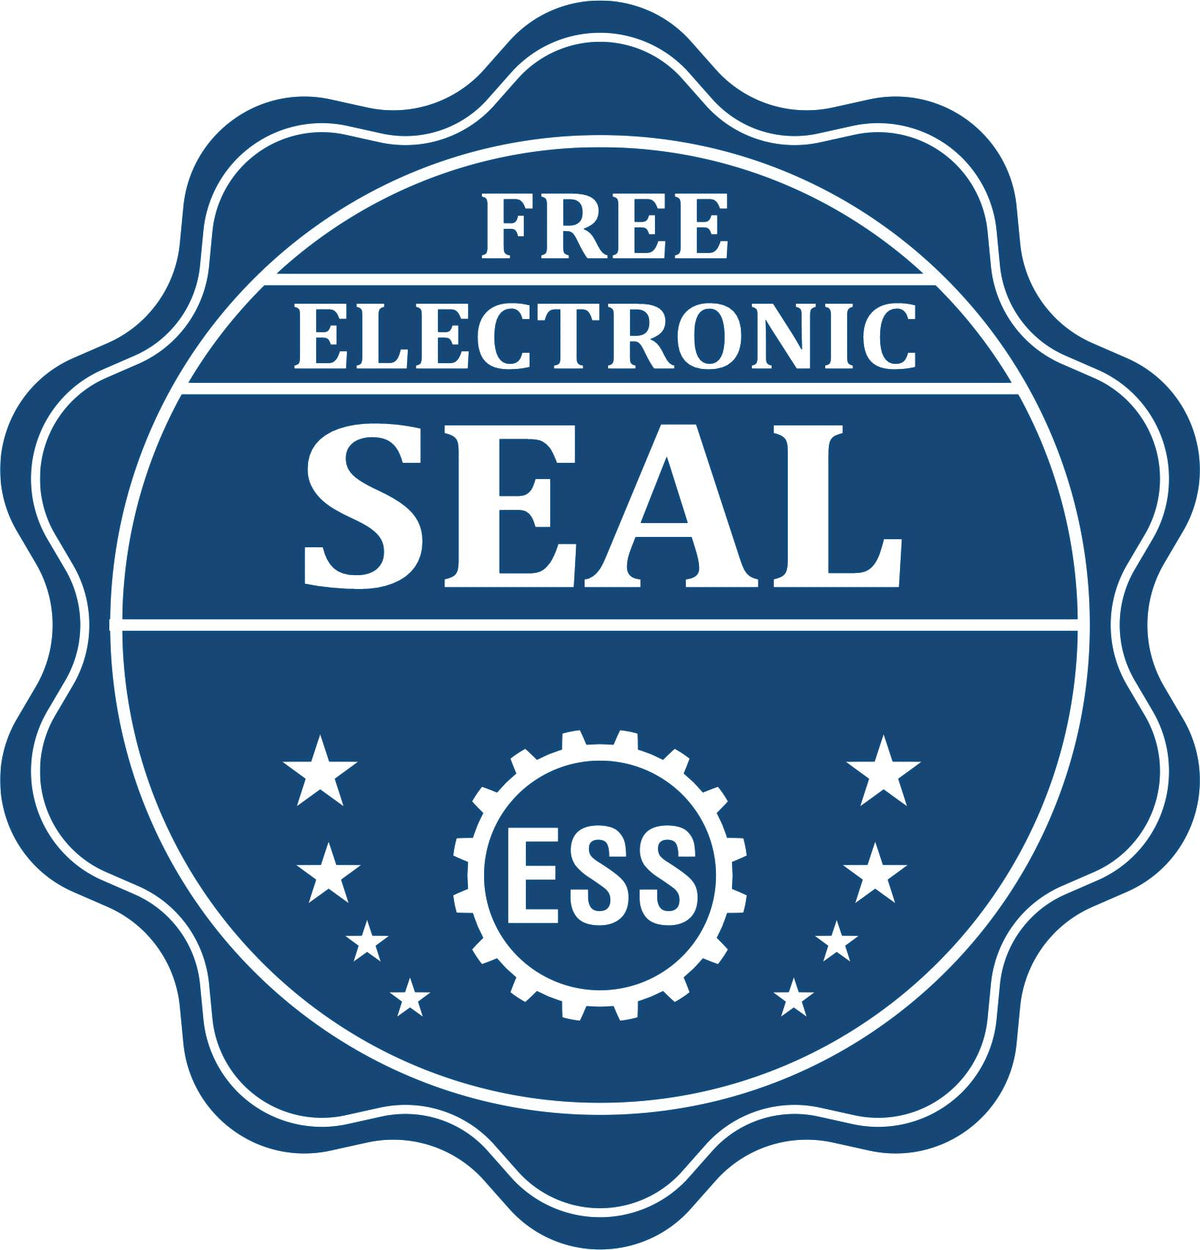 A badge showing a free electronic seal for the Handheld Connecticut Professional Geologist Embosser with stars and the ESS gear on the emblem.